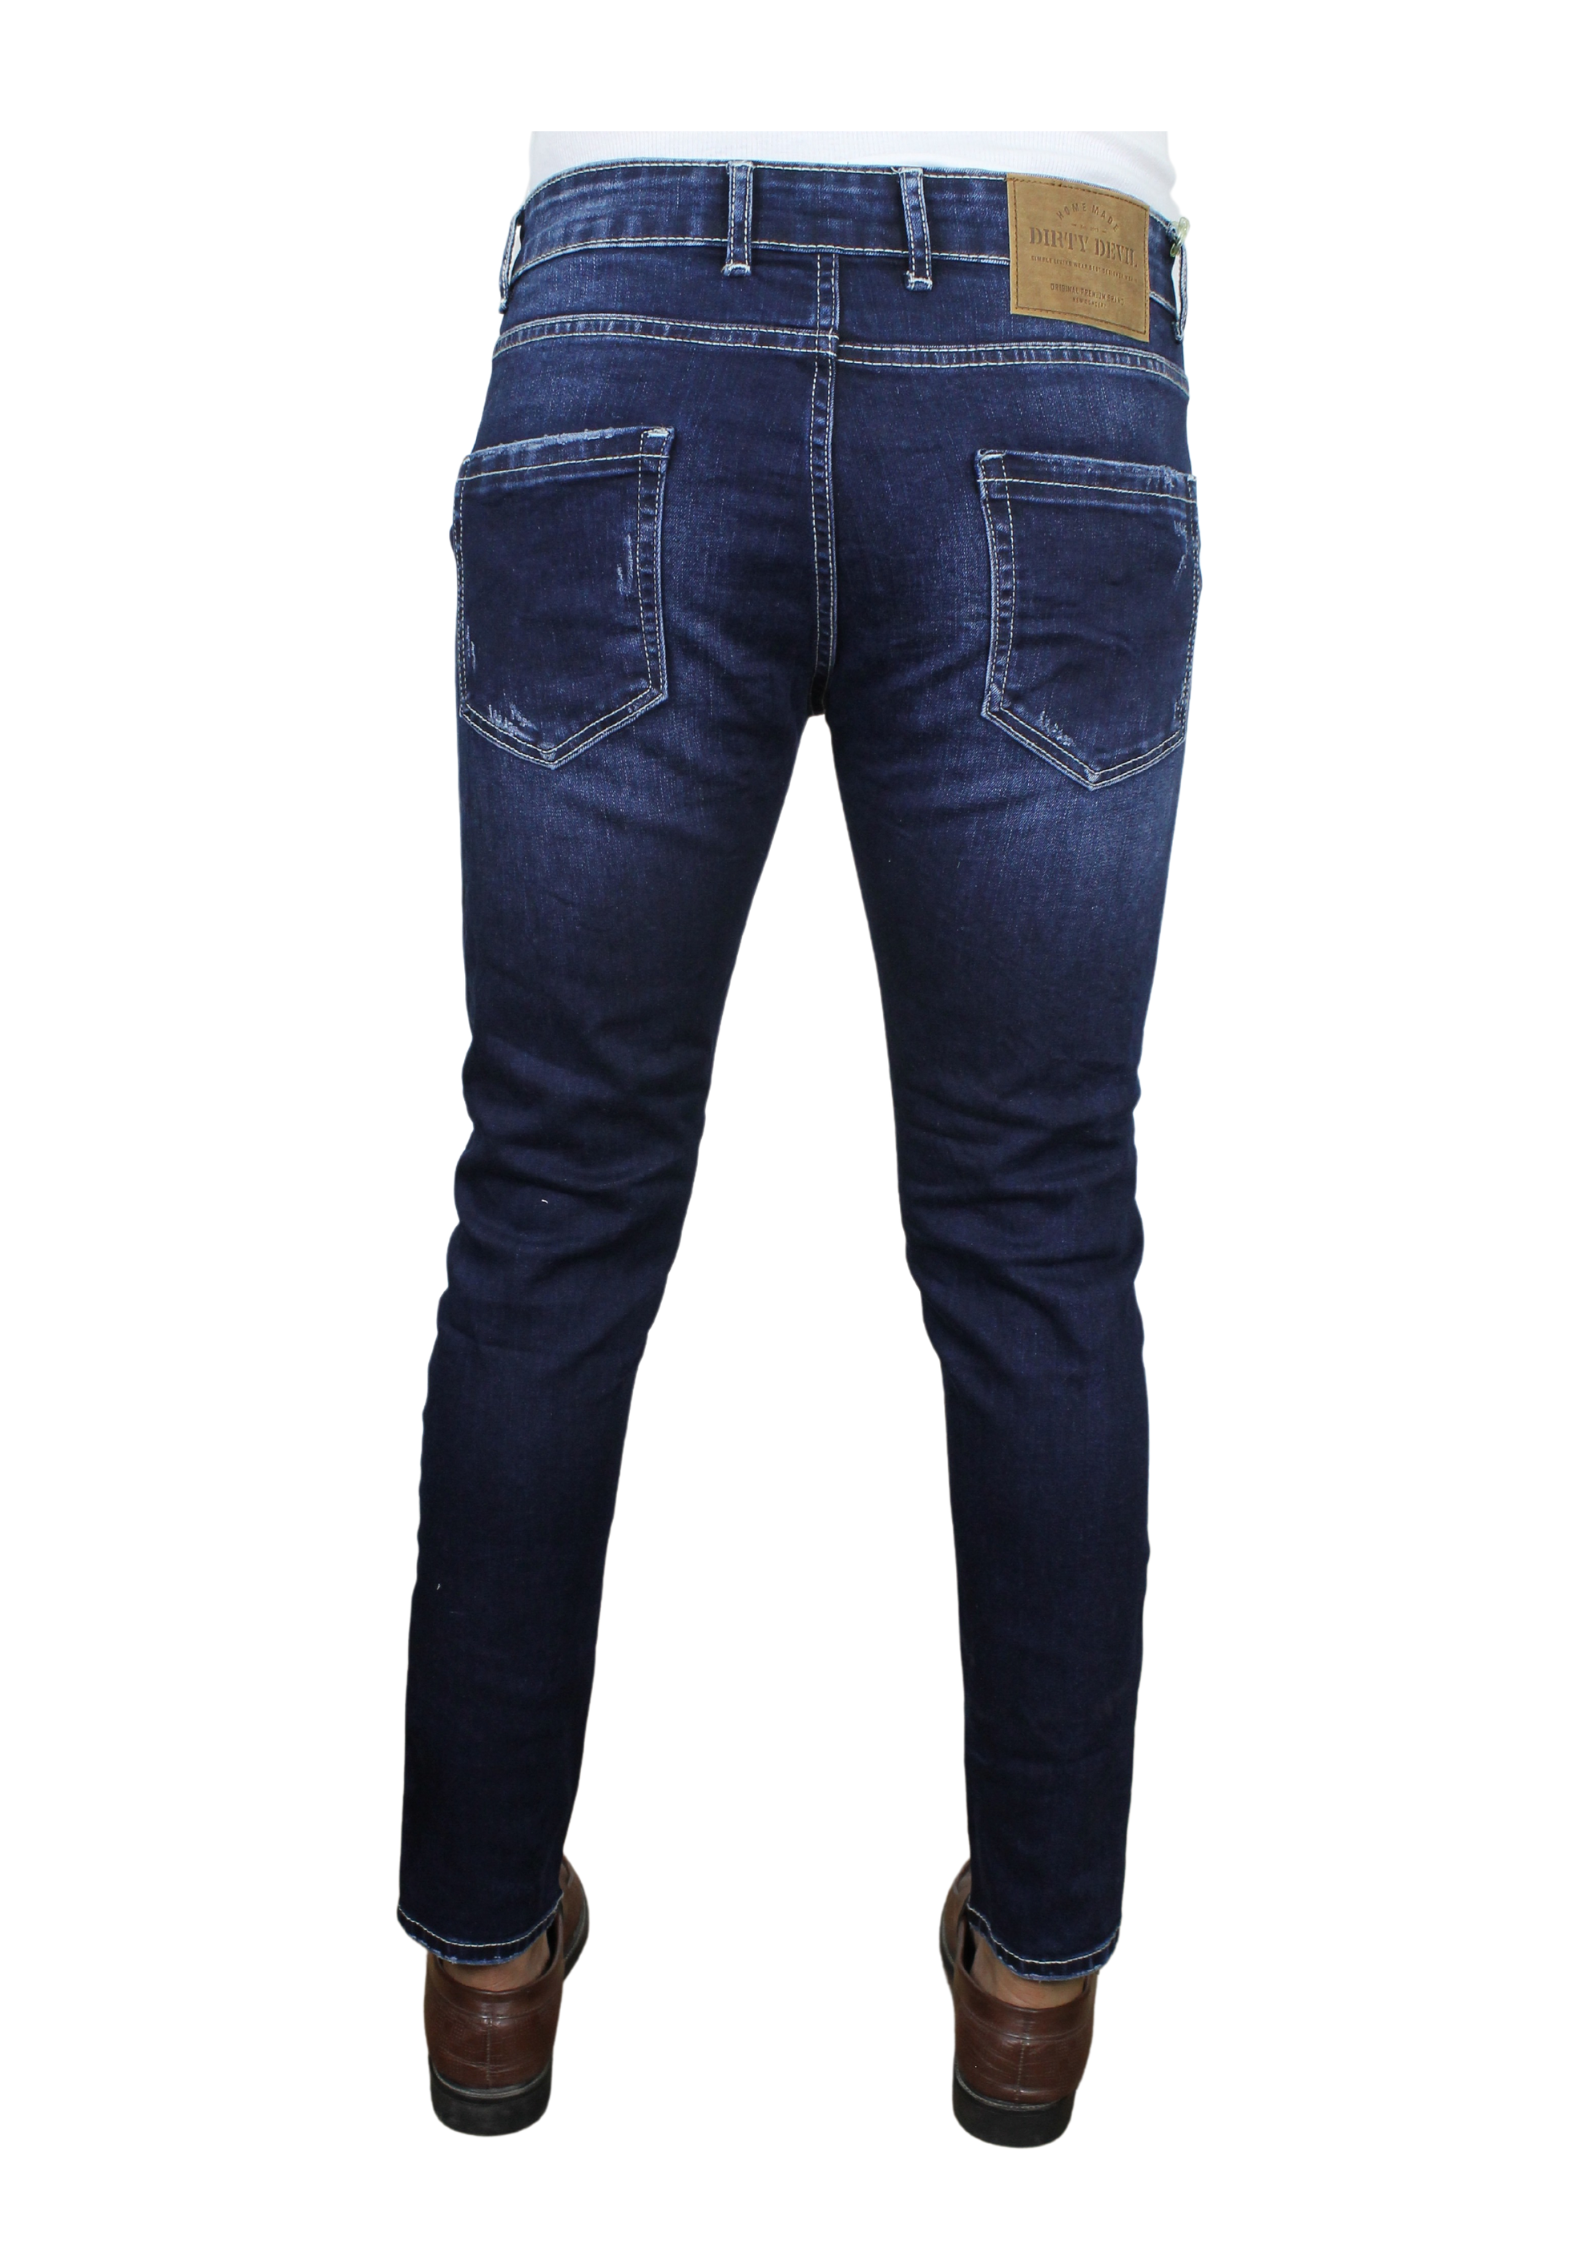 Classic Oxford Blue Light Ankle Fit Funky Denim Jeans